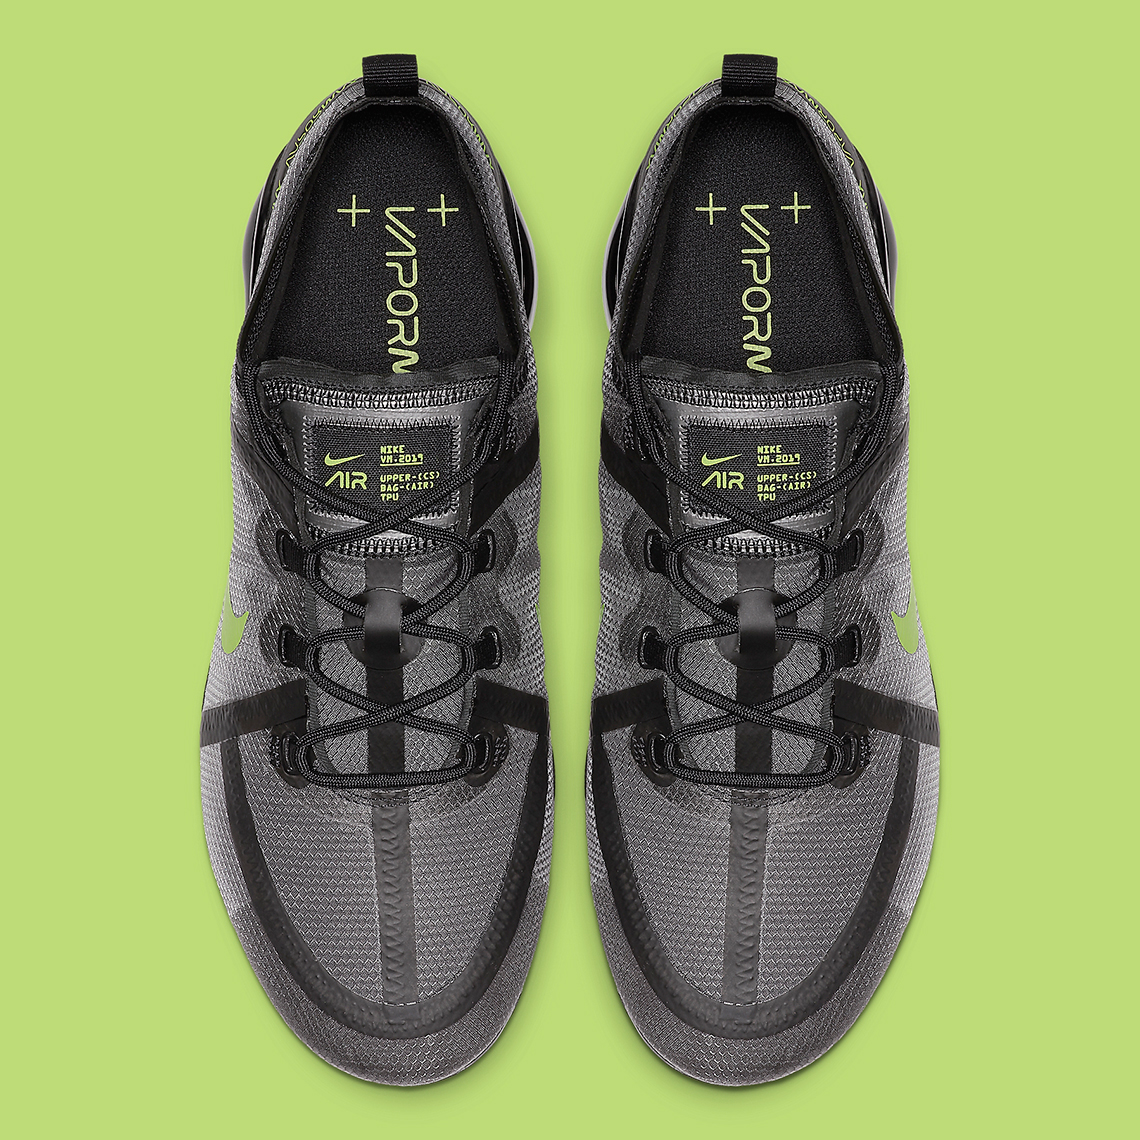 Nike VaporMax 2019 Releasing In Black And Volt: Official s